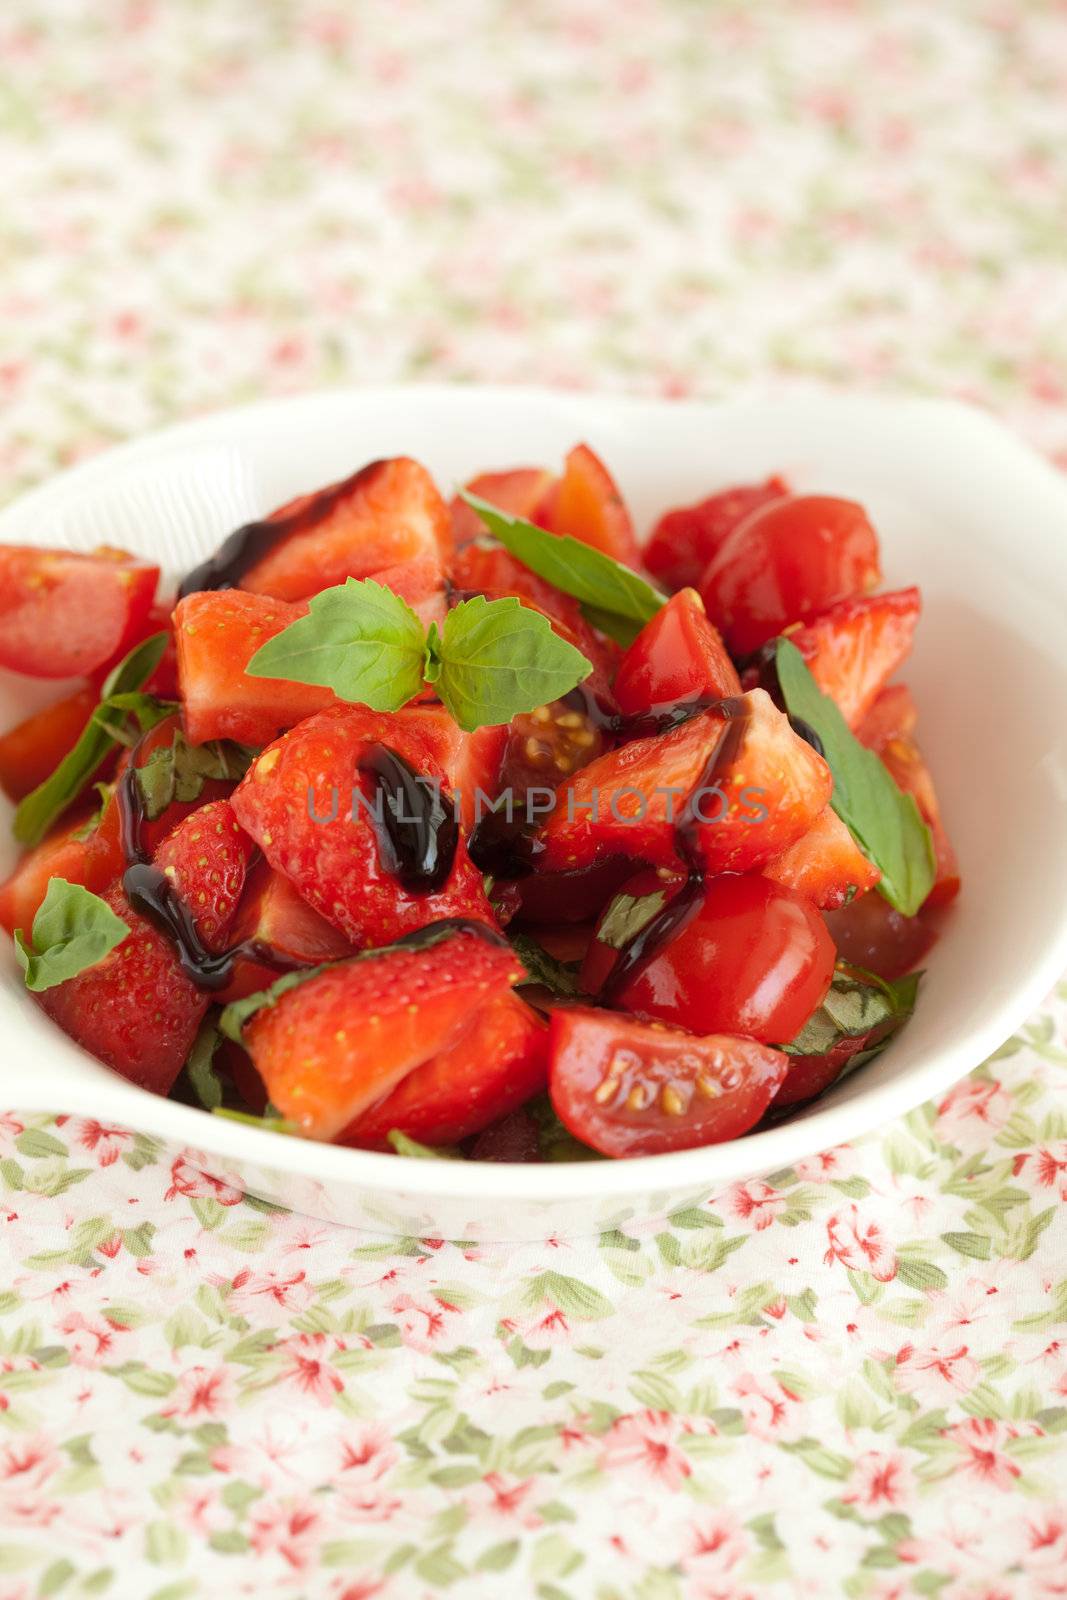 Delicious healthy salad with strawberries and tomatoes